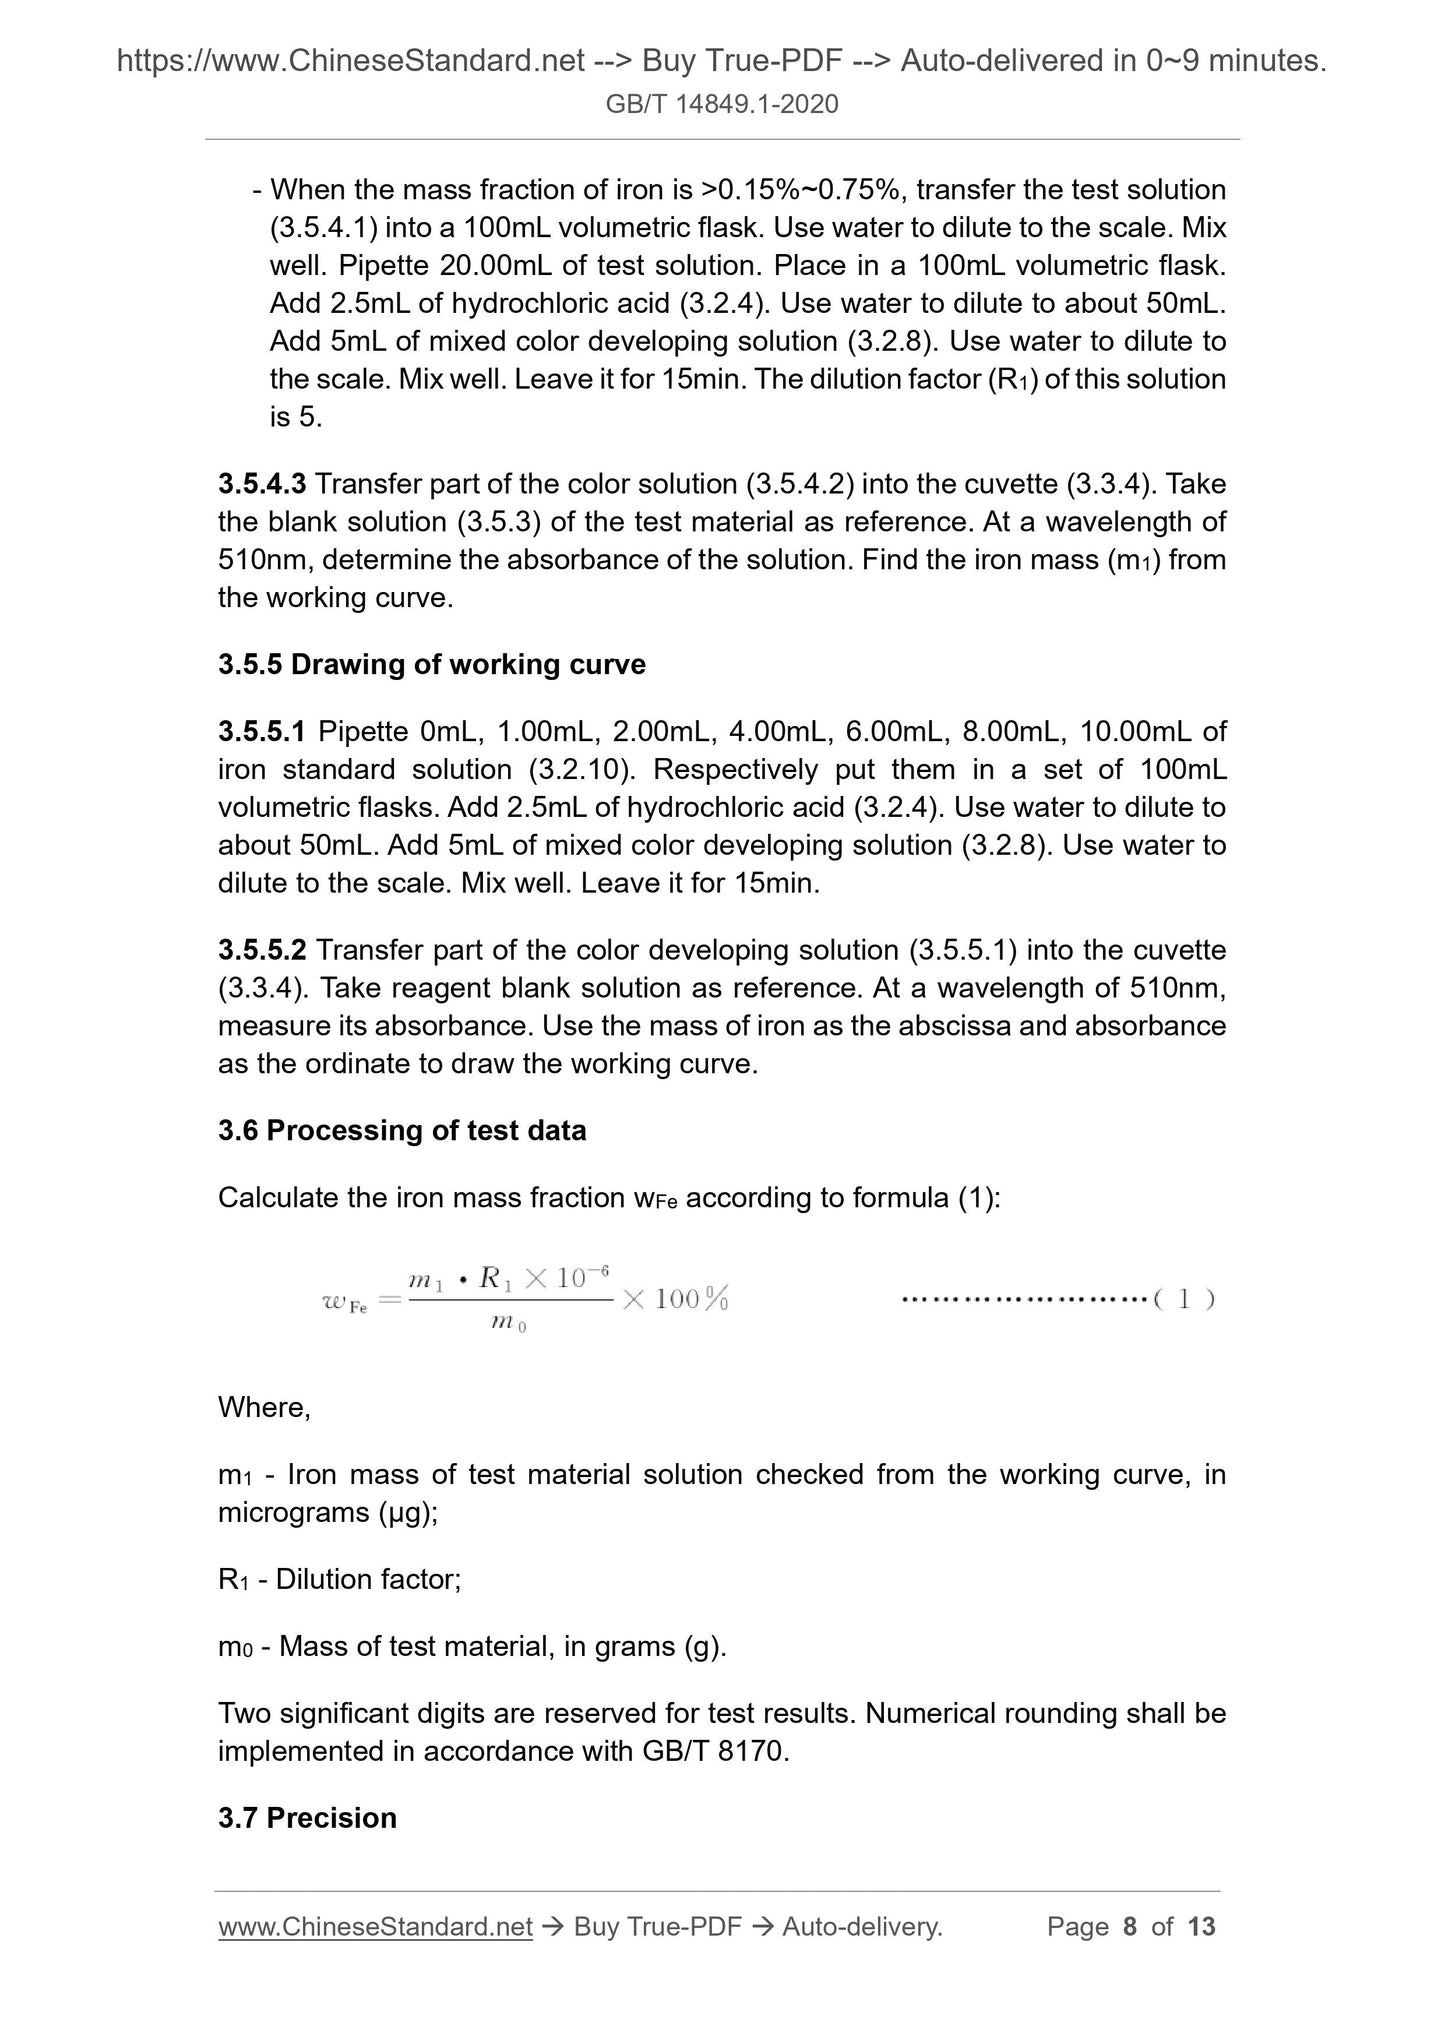 GB/T 14849.1-2020 Page 6